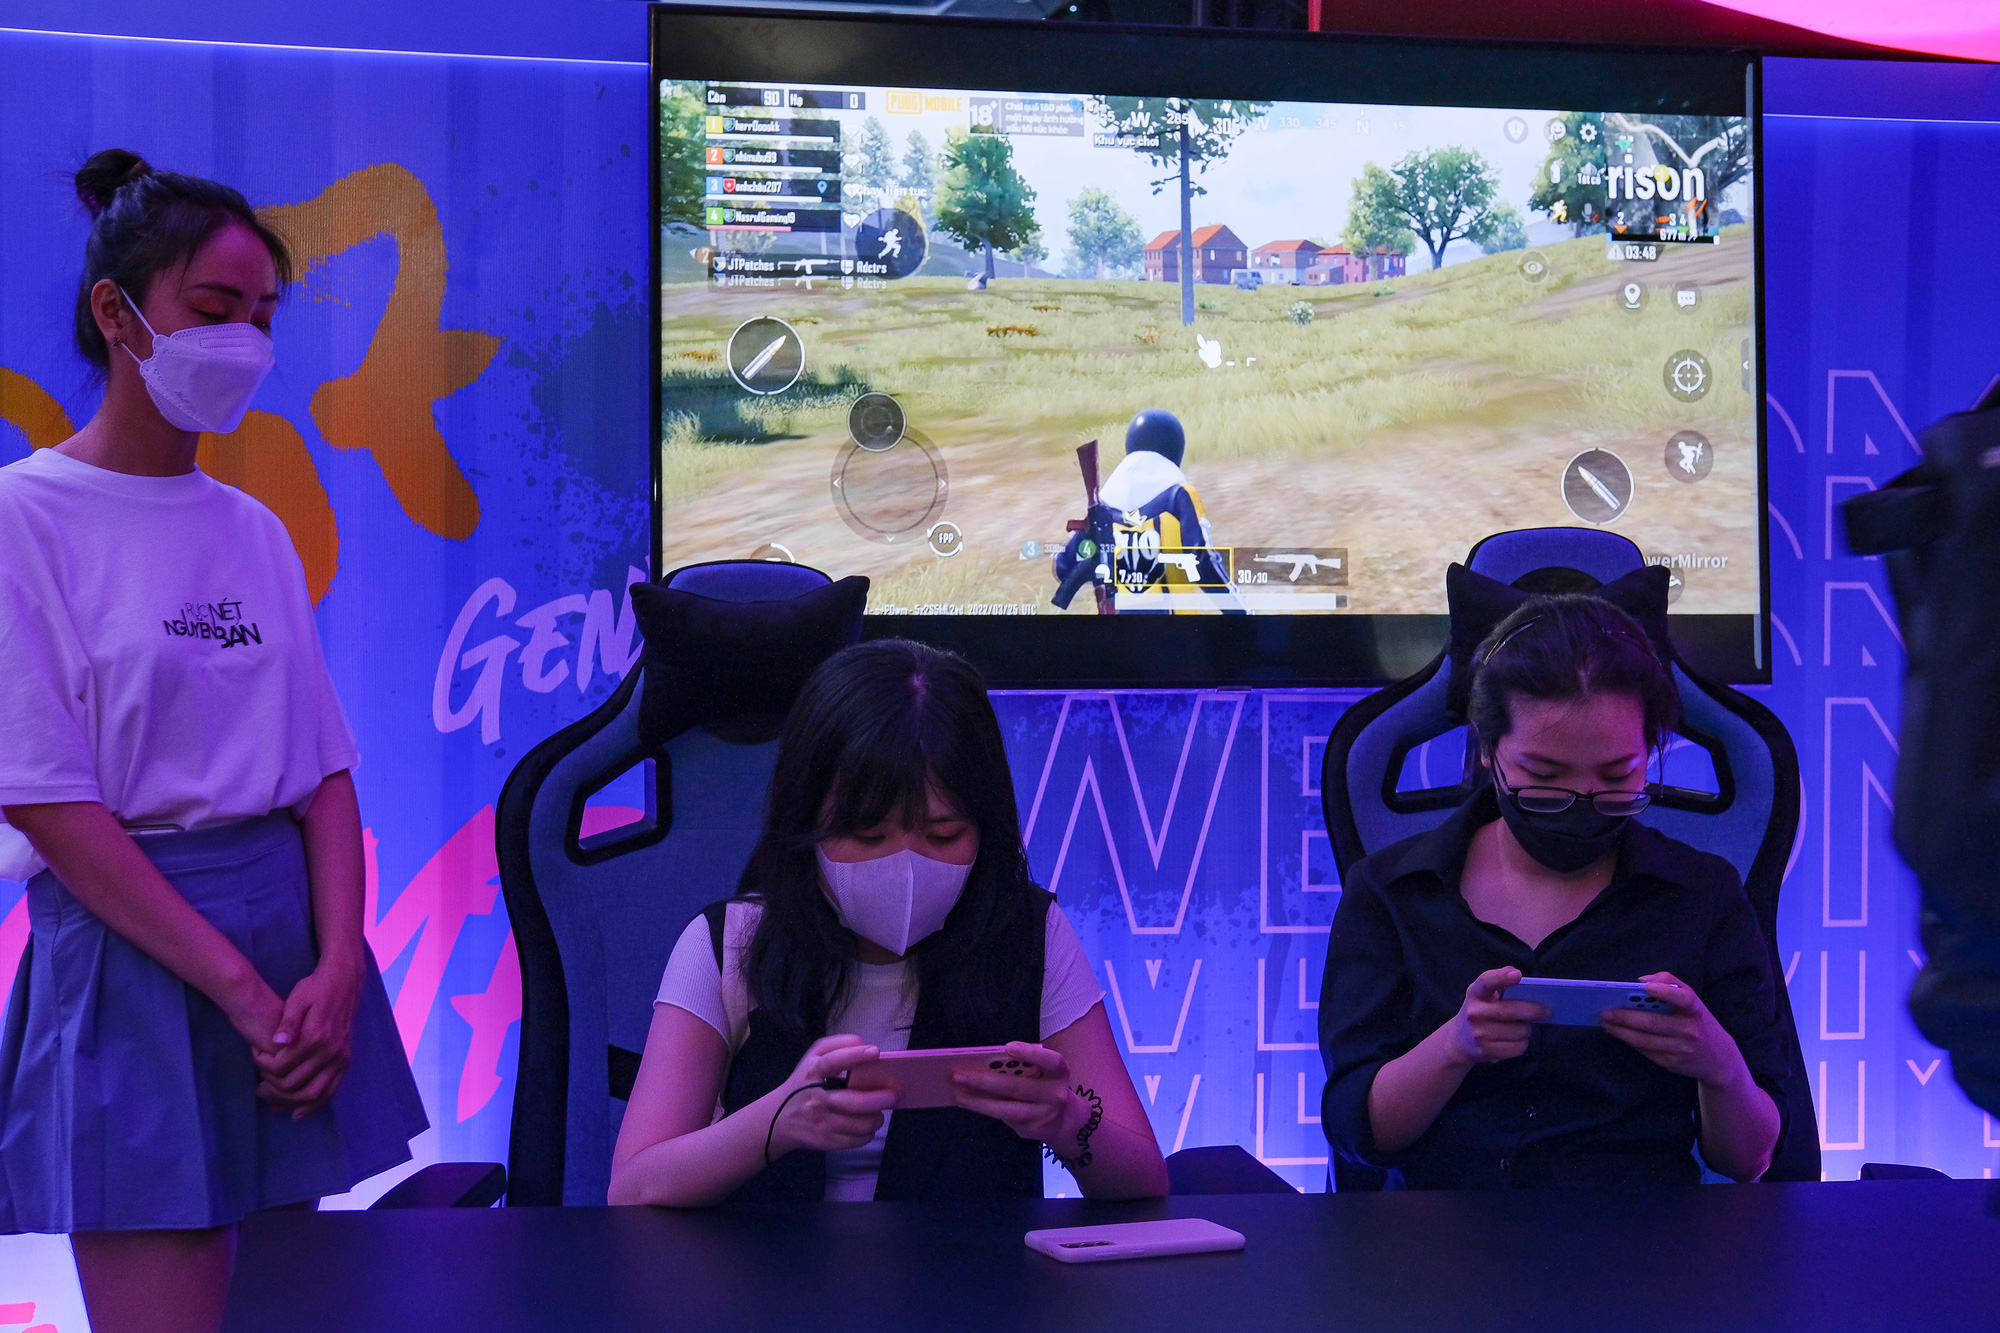 Sponsoring PUBG Mobile at SEA Games 31, Galaxy A is determined to win the hearts of GenZ gamers - Photo 5.